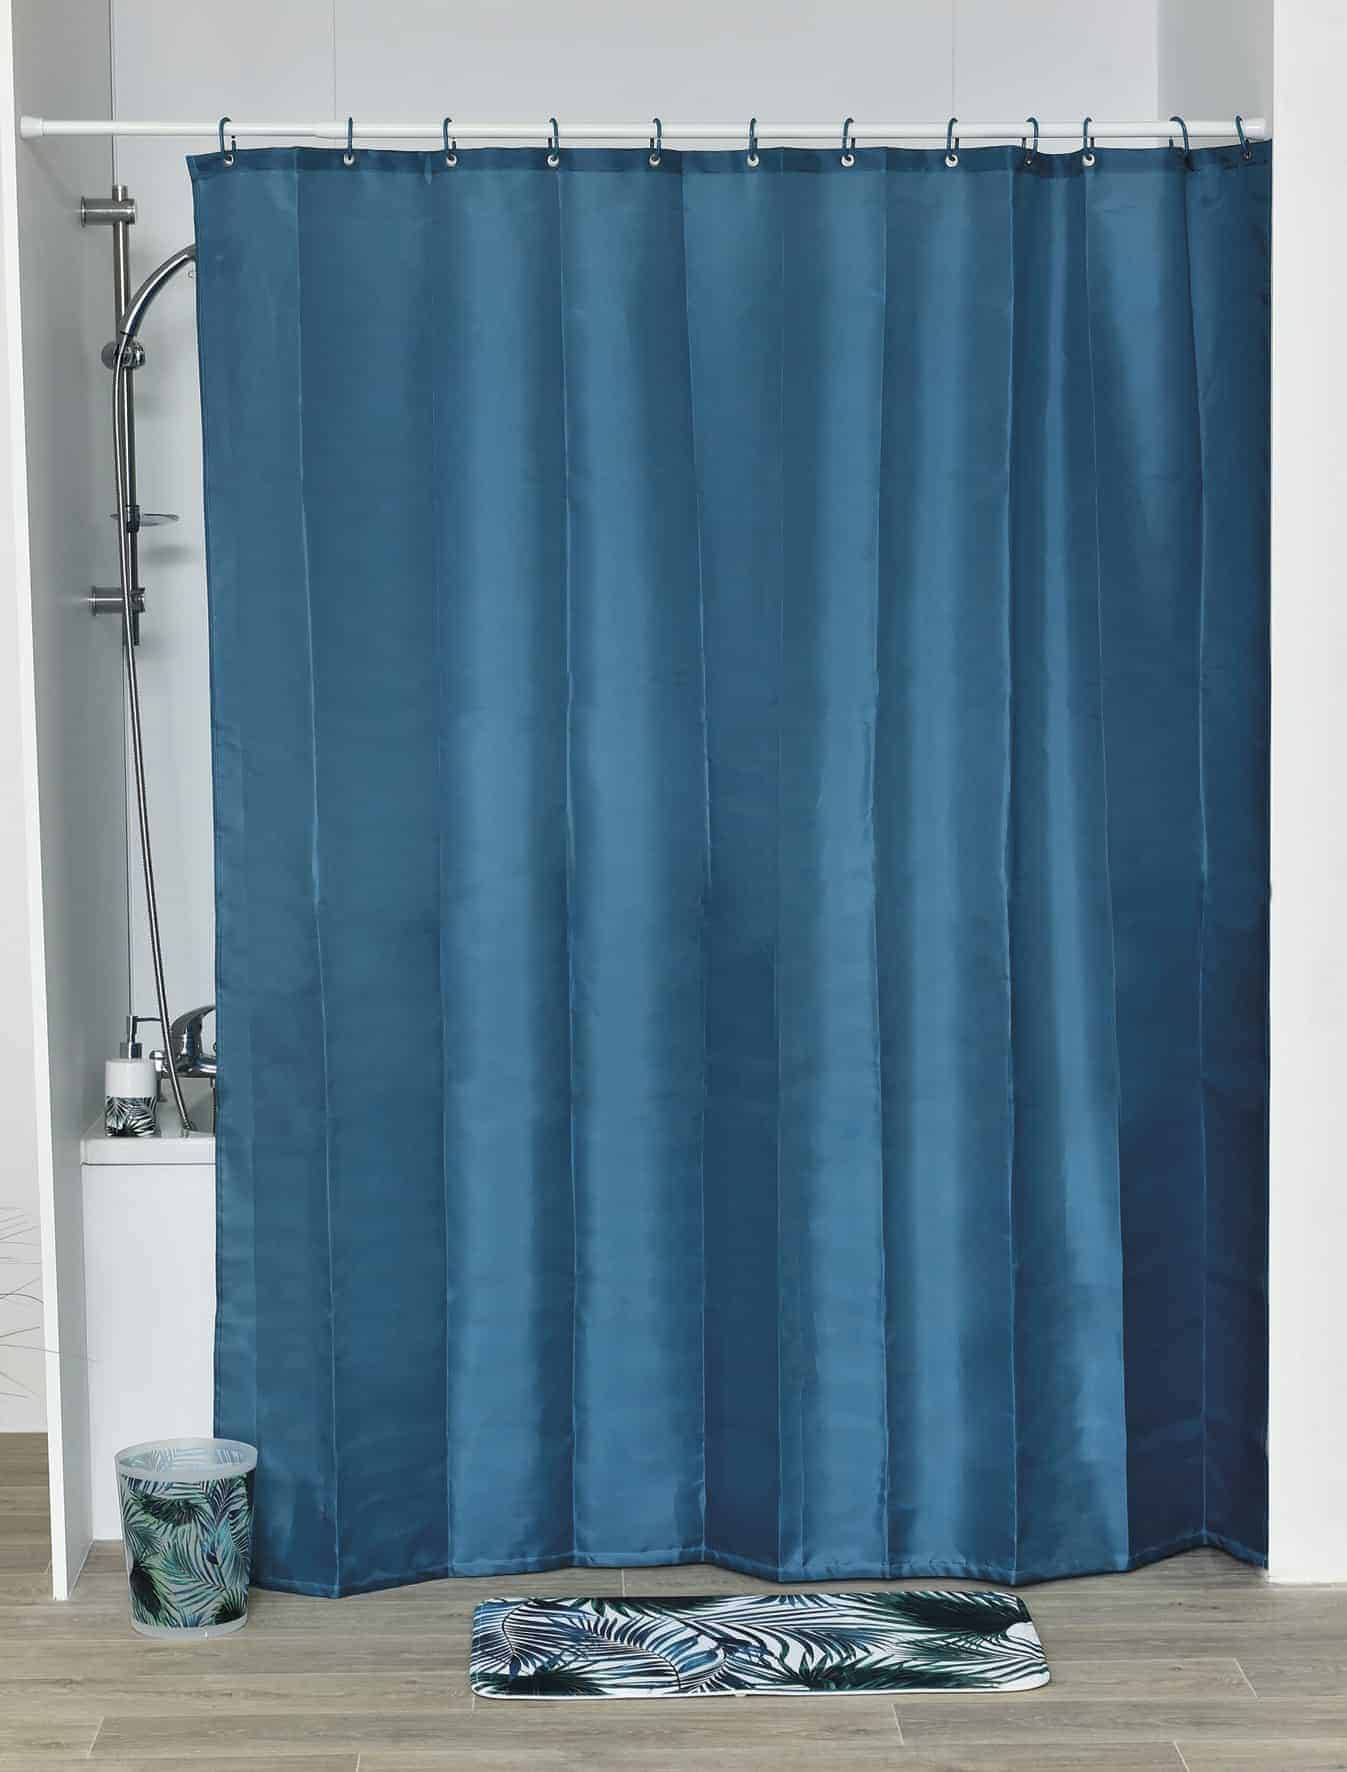 Fabric Polyester Shower Curtain, Solid Blue Fabric Shower Curtains